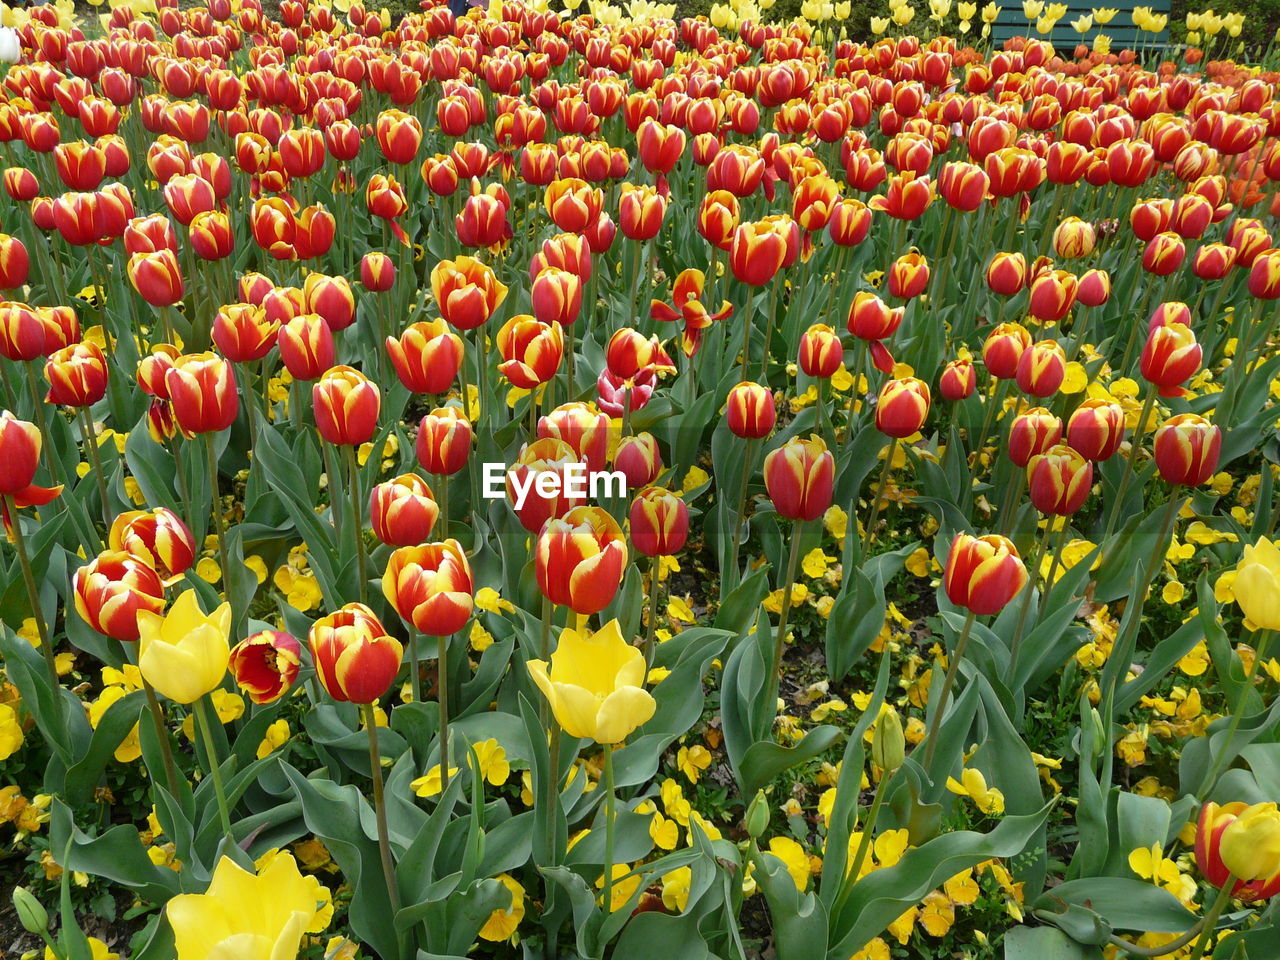 RED TULIPS BLOOMING ON FIELD